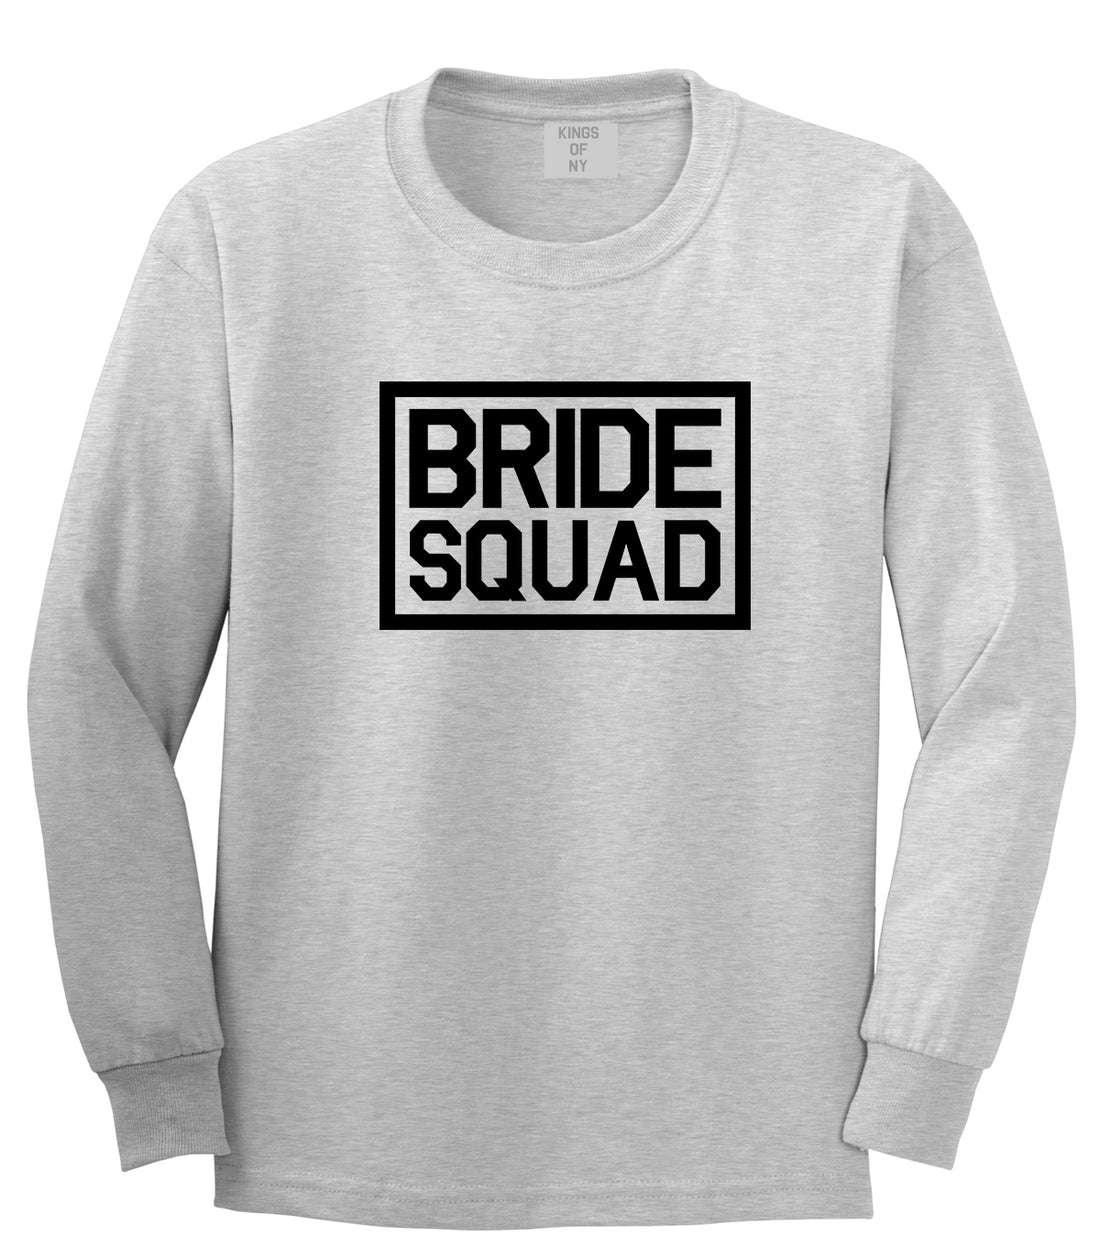 Bride Squad Bachlorette Party Grey Long Sleeve T-Shirt by Kings Of NY